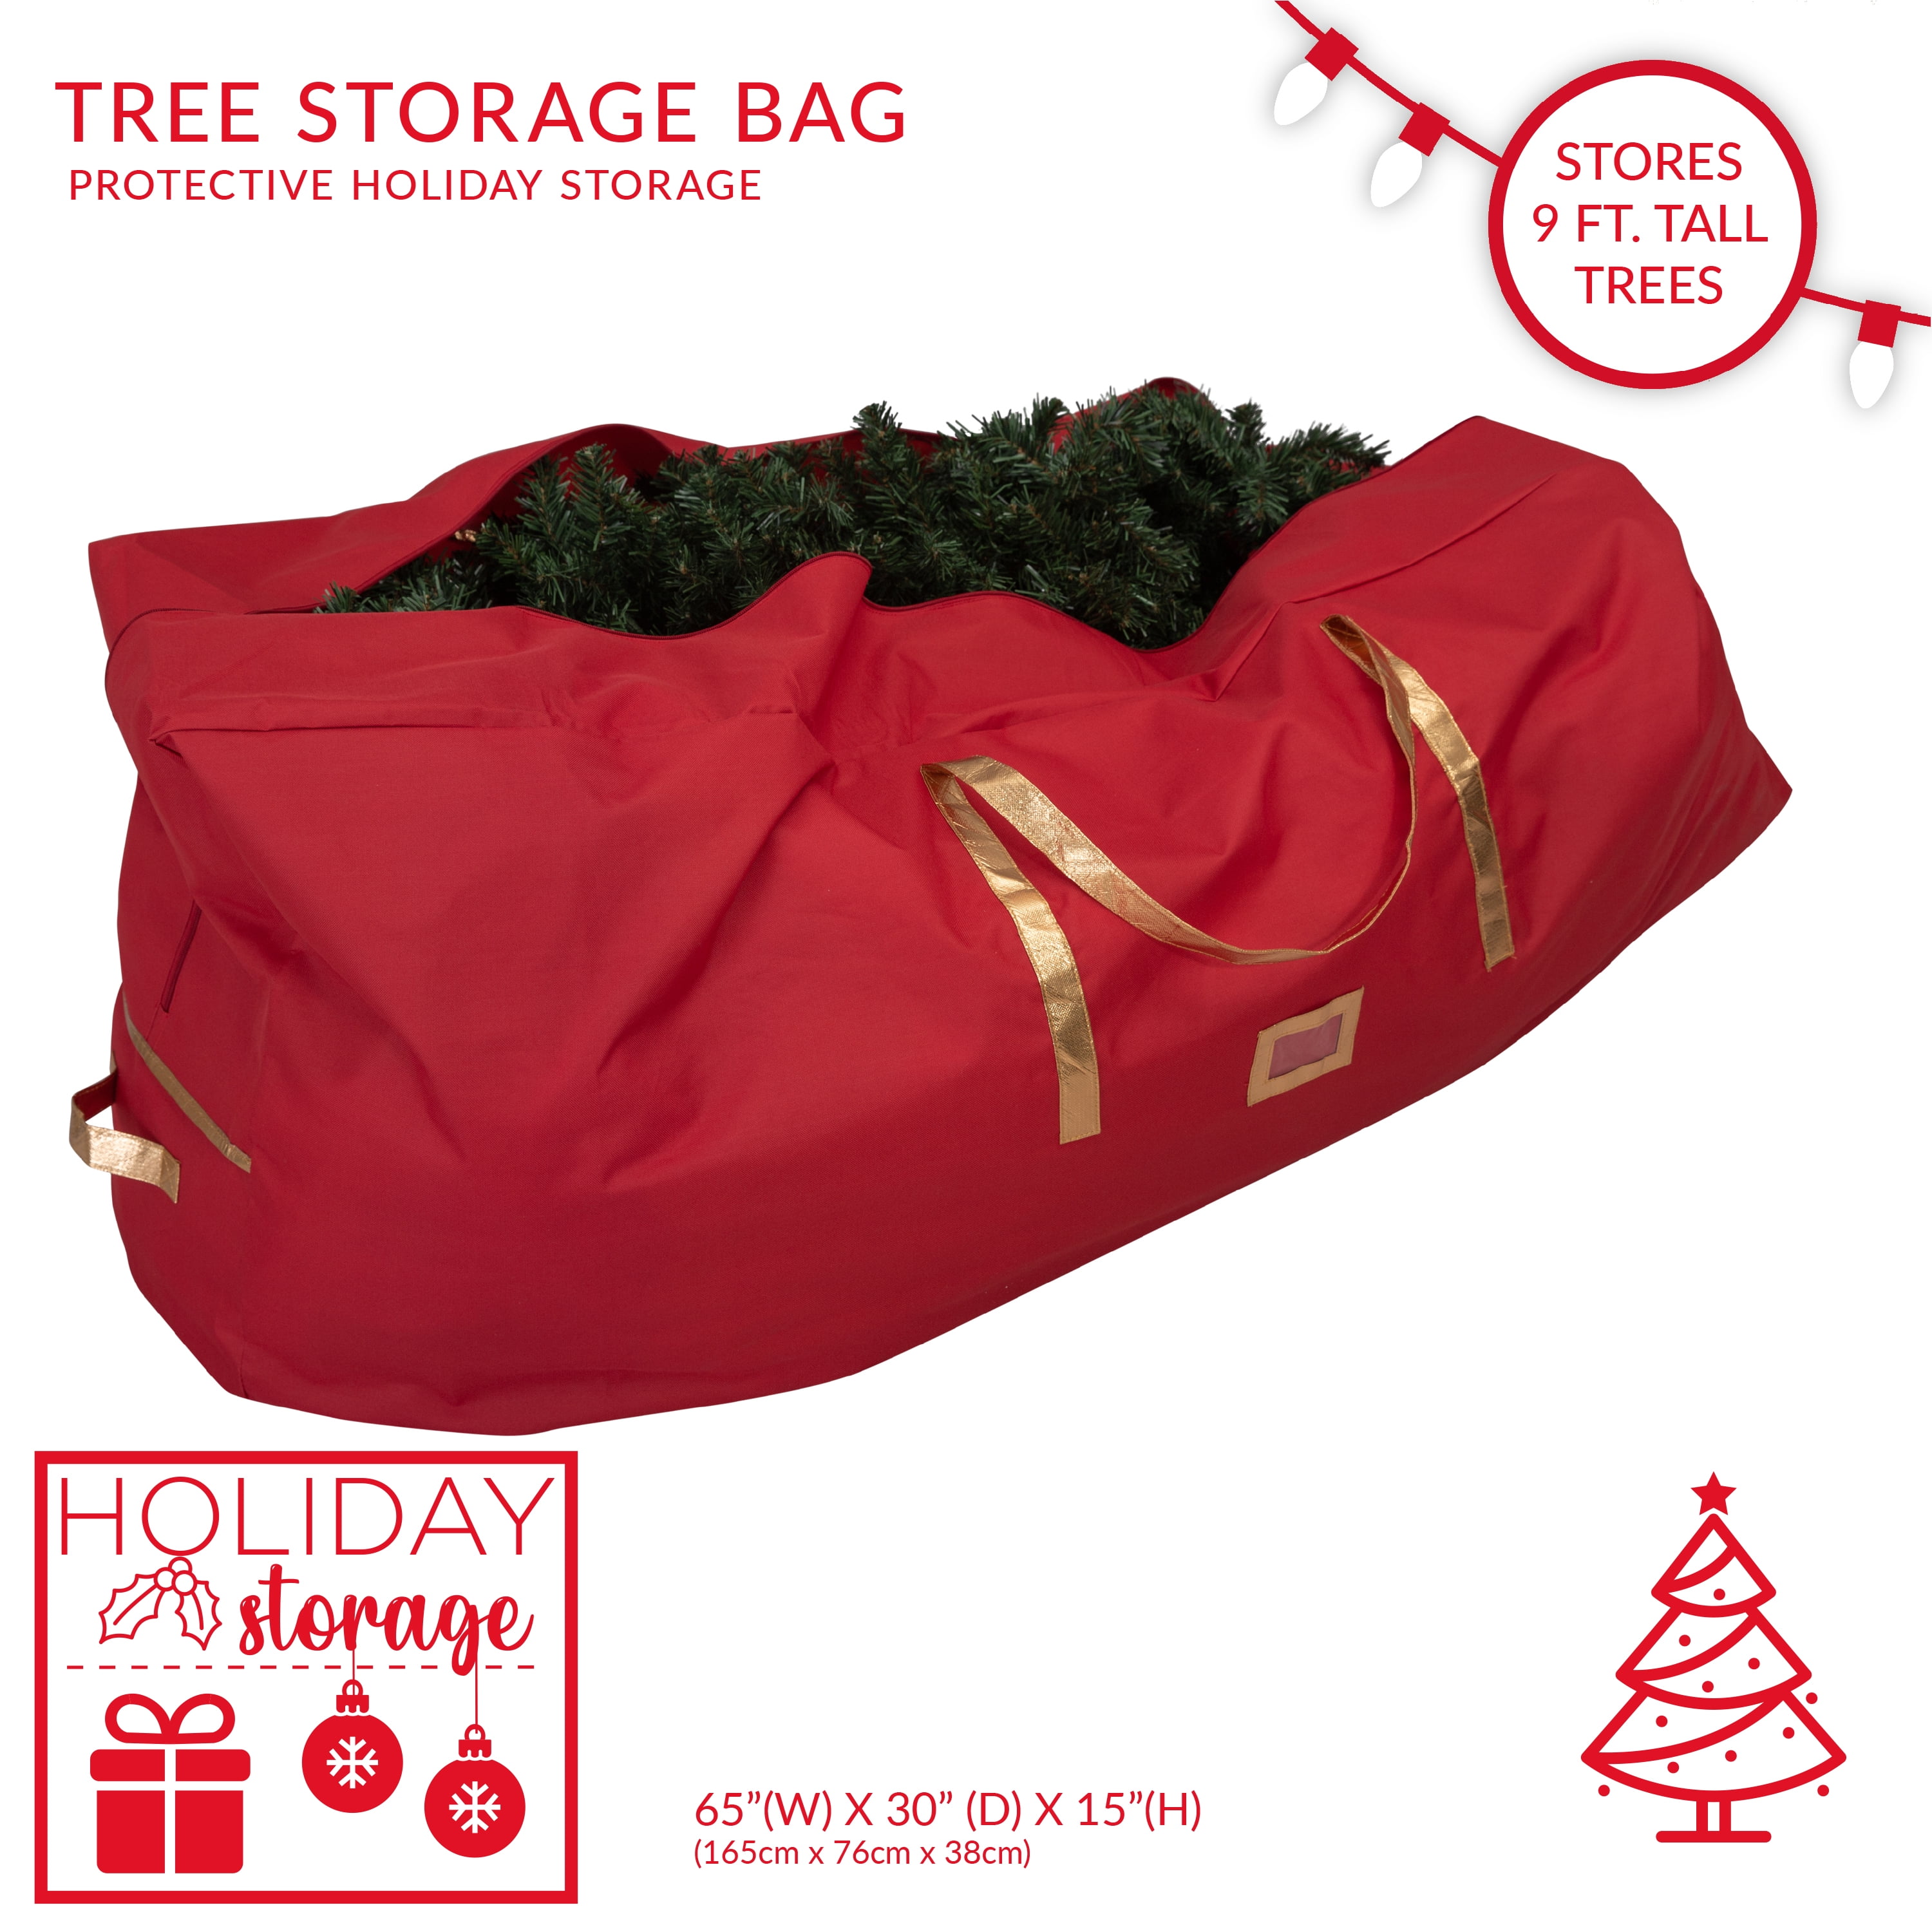 Fraser Hill Farm Red Polyester Heavy-Duty Storage Bag for Small